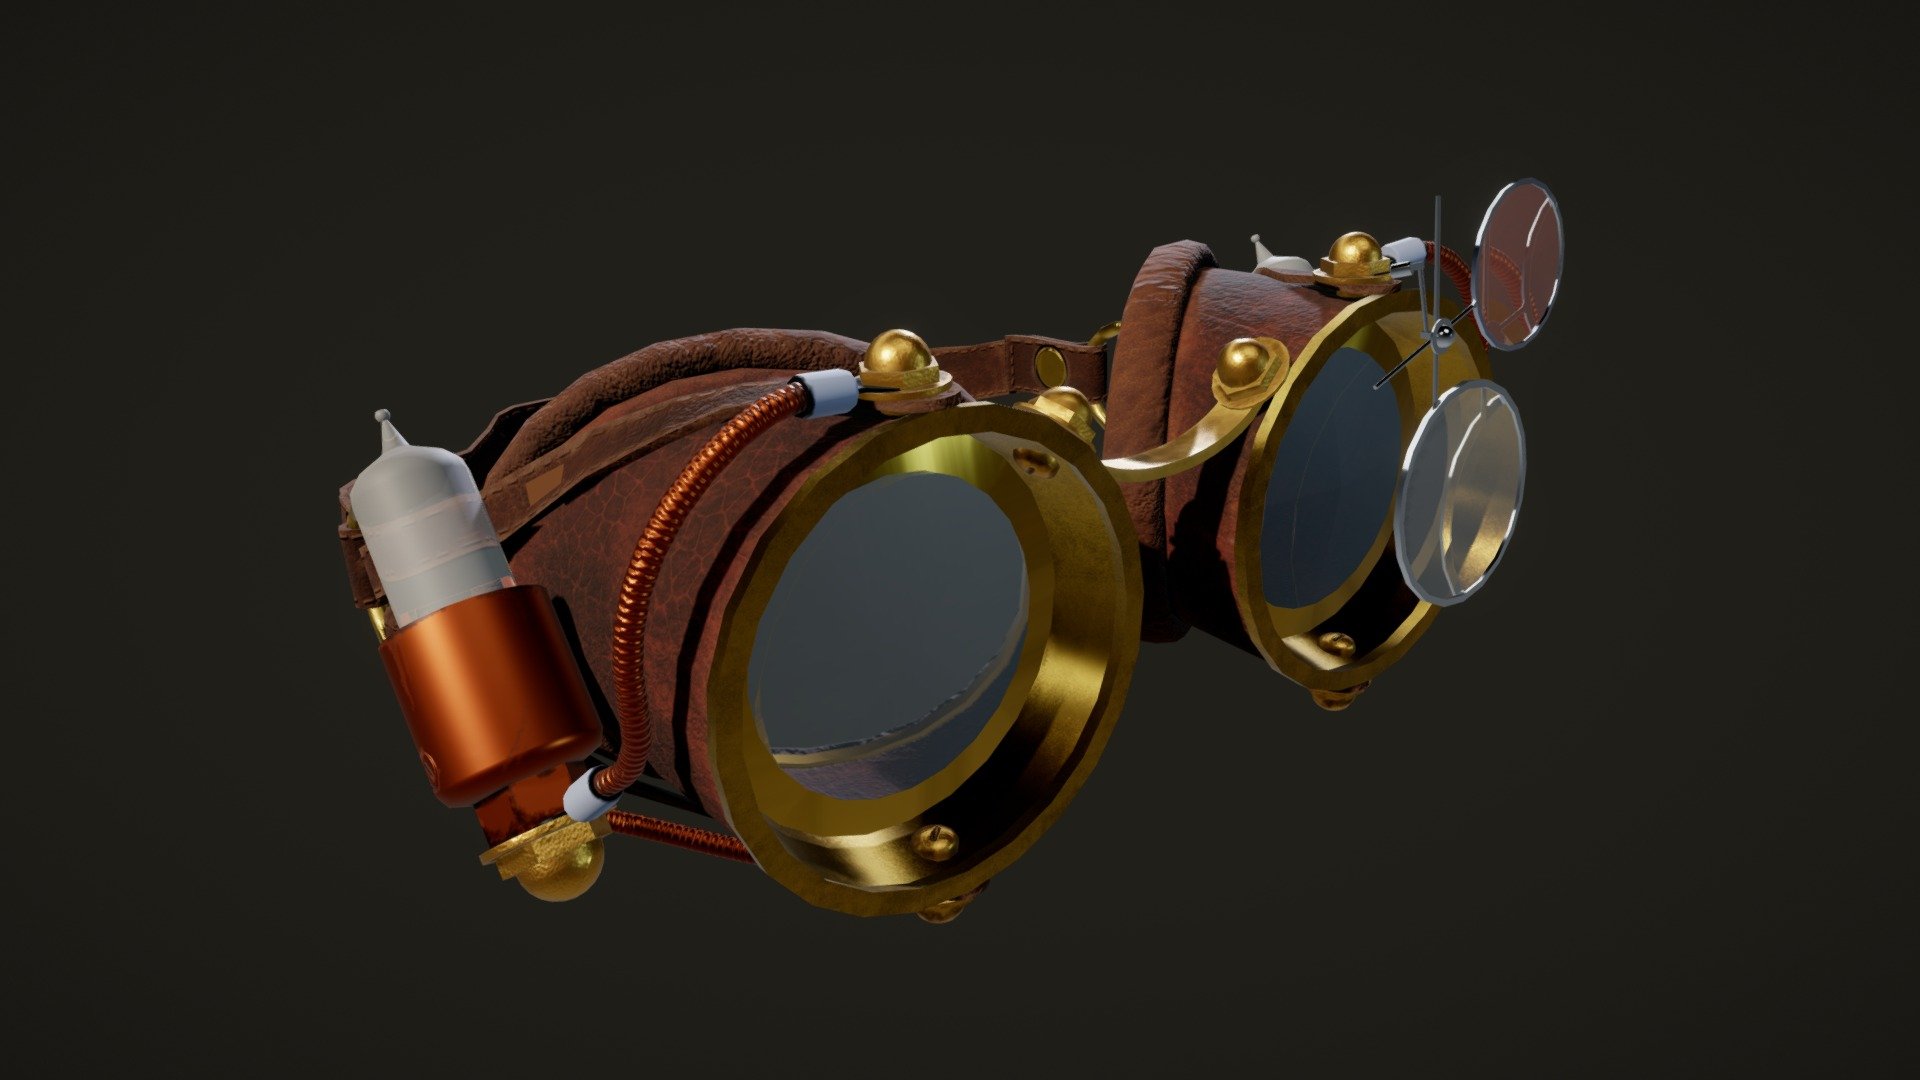 Personal project and trying to get better with 3Dcoat. Had some issues and translucency problems but this taught me allot (: - Steampunk Goggles - 3D model by Jake Taylor (@zerlupus) 3d model